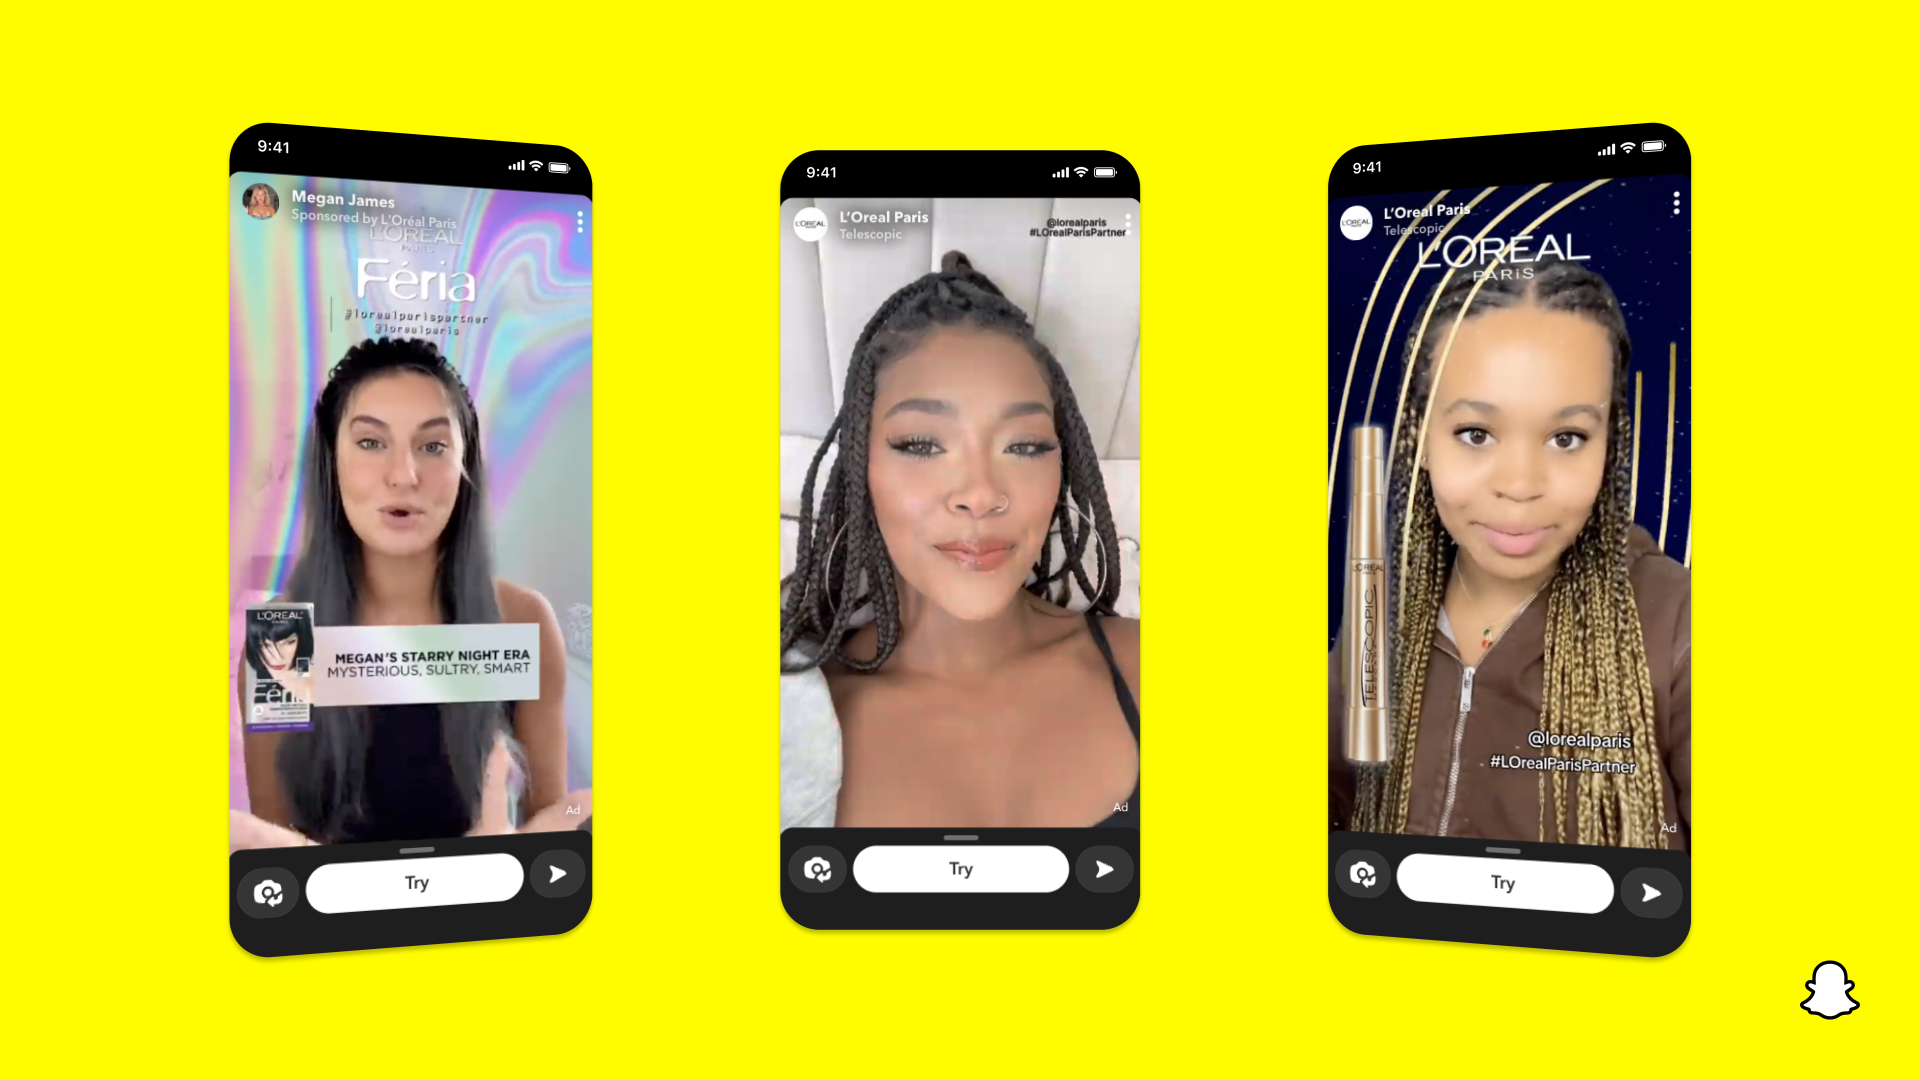 Snapchat Updates for Creators, Businesses to Take on Instagram Detailed at  Snap Partner Summit 2021